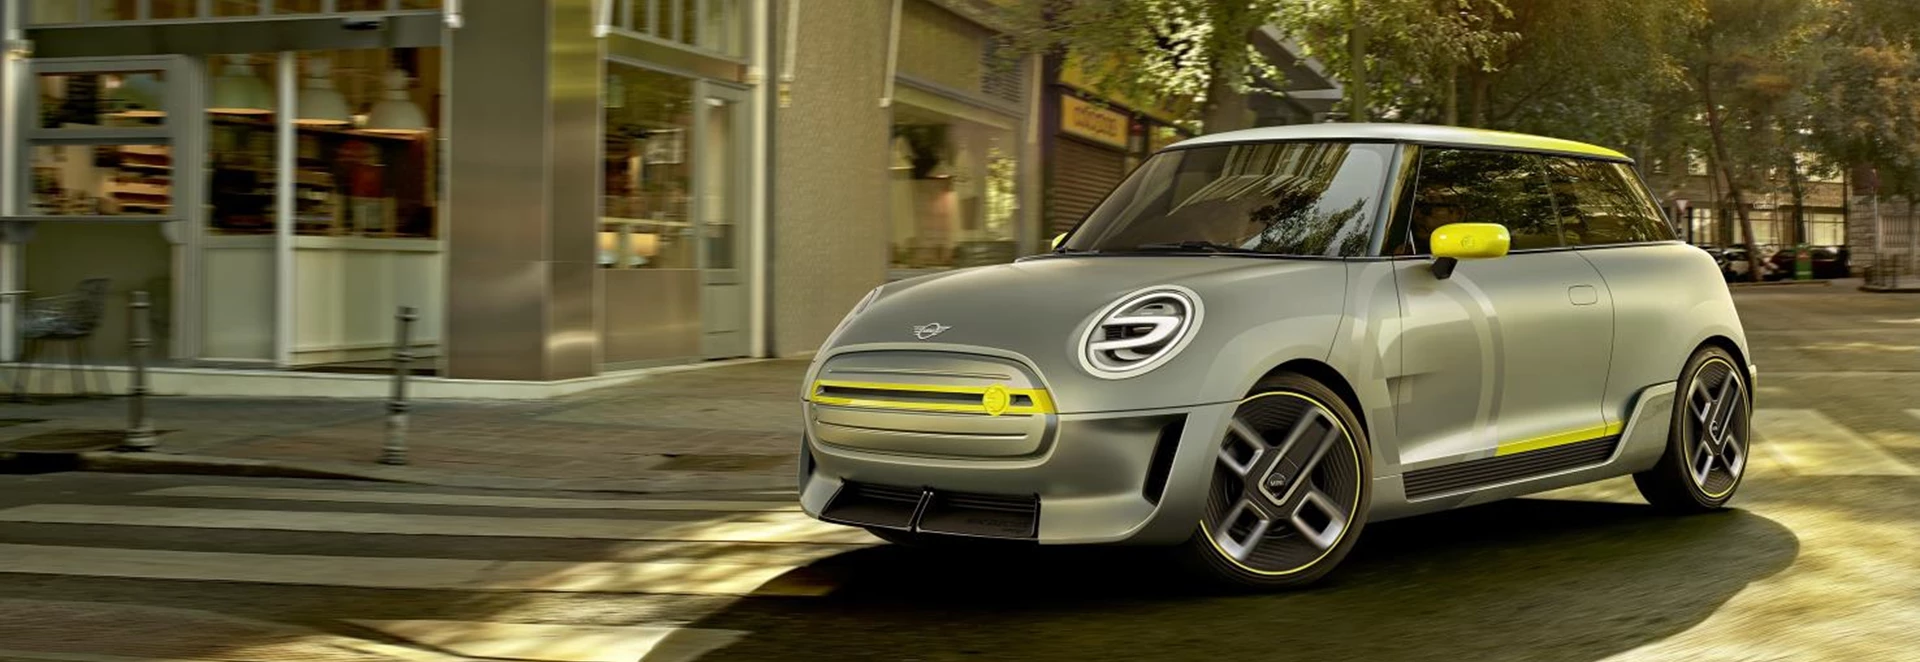 MINI concept car previews first all-electric production model 